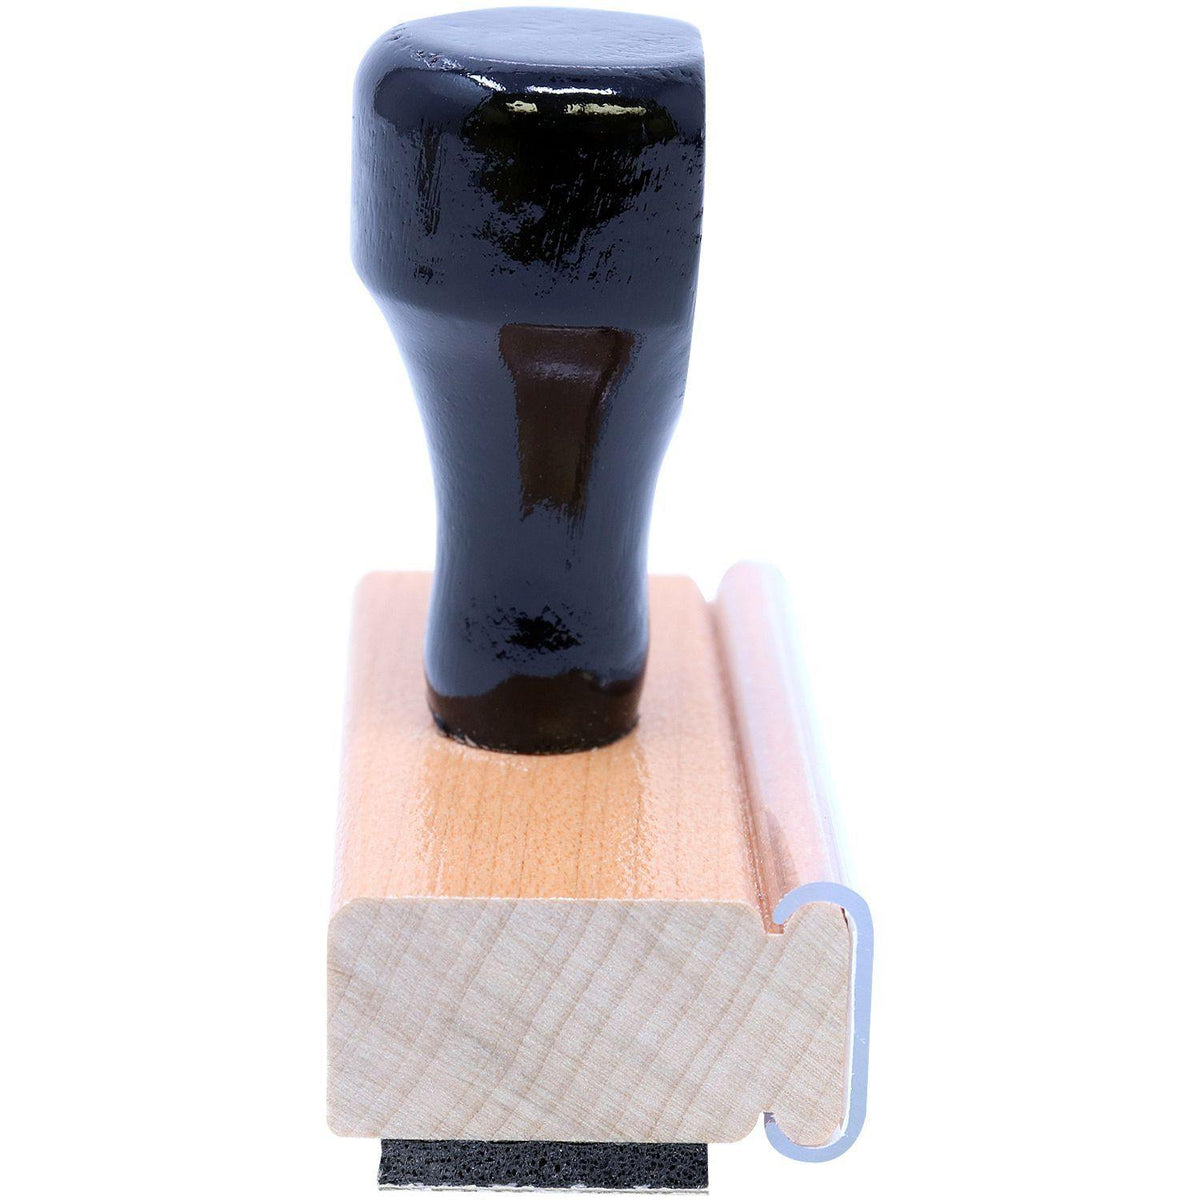 Large Temporarily Away Rubber Stamp - Engineer Seal Stamps - Brand_Acorn, Impression Size_Large, Stamp Type_Regular Stamp, Type of Use_Postal &amp; Mailing